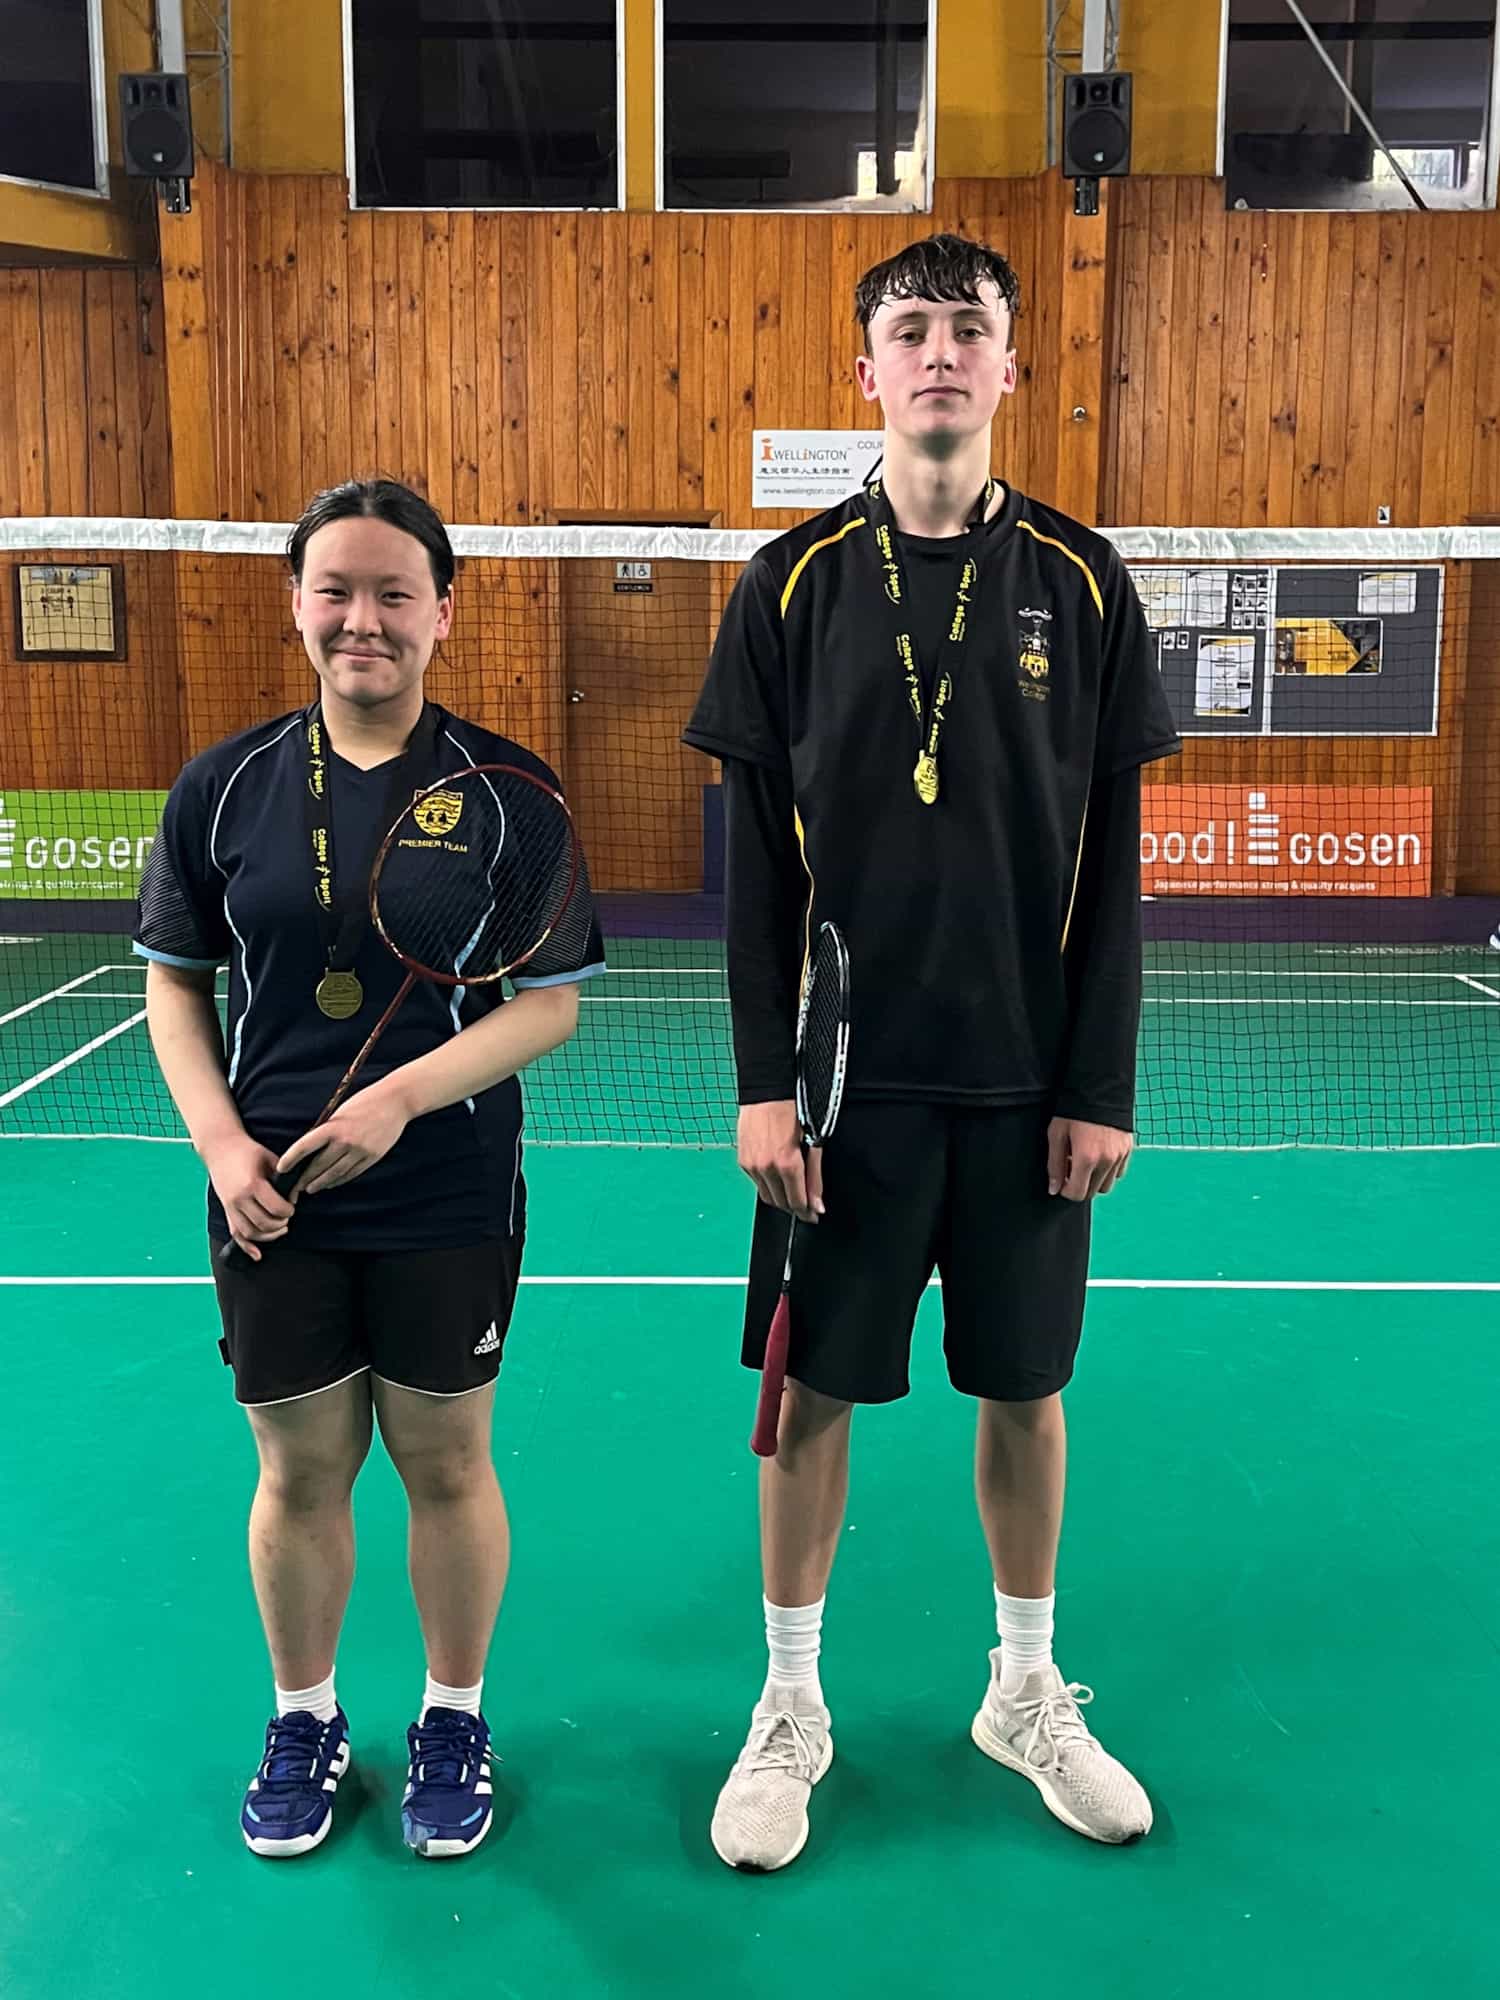 Jnr and Open Badminton champs results